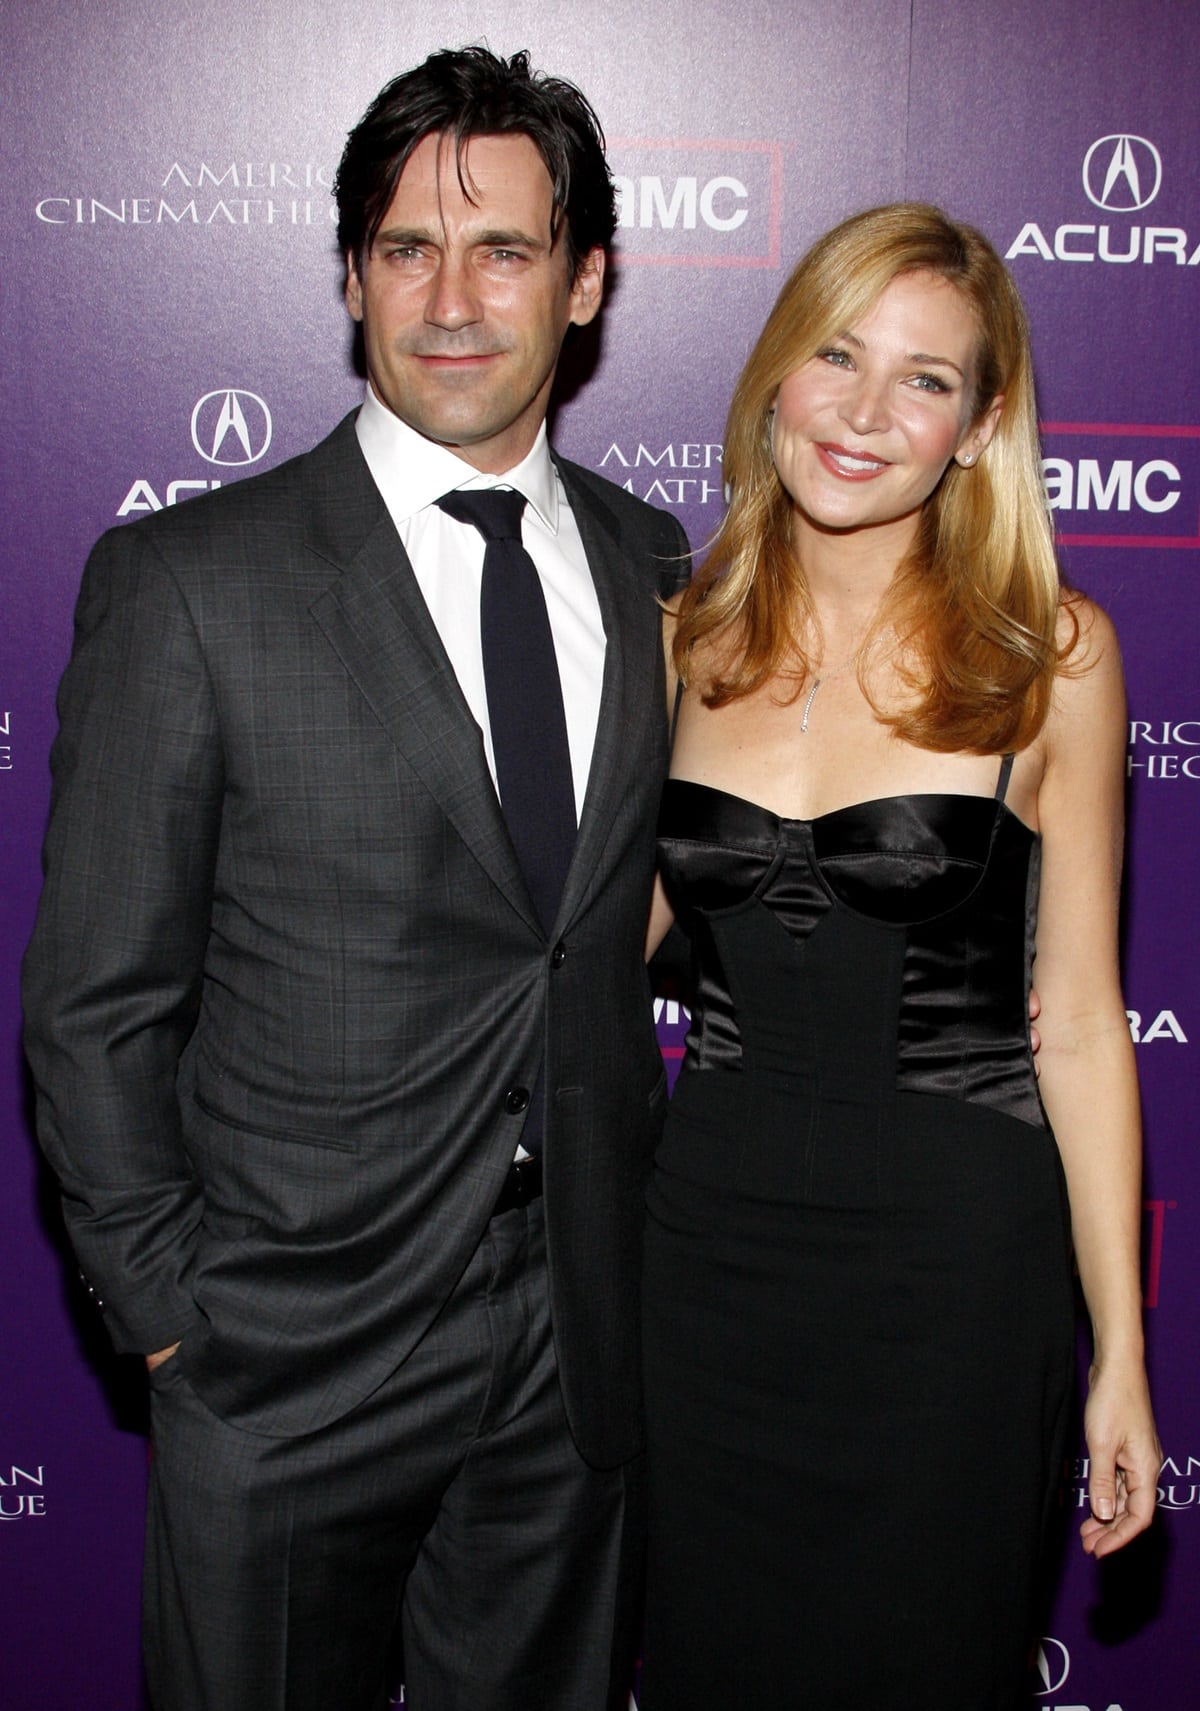 Jon Hamm and Jennifer Westfeldt dated from 1997 to 2015 and first met when they were struggling actors